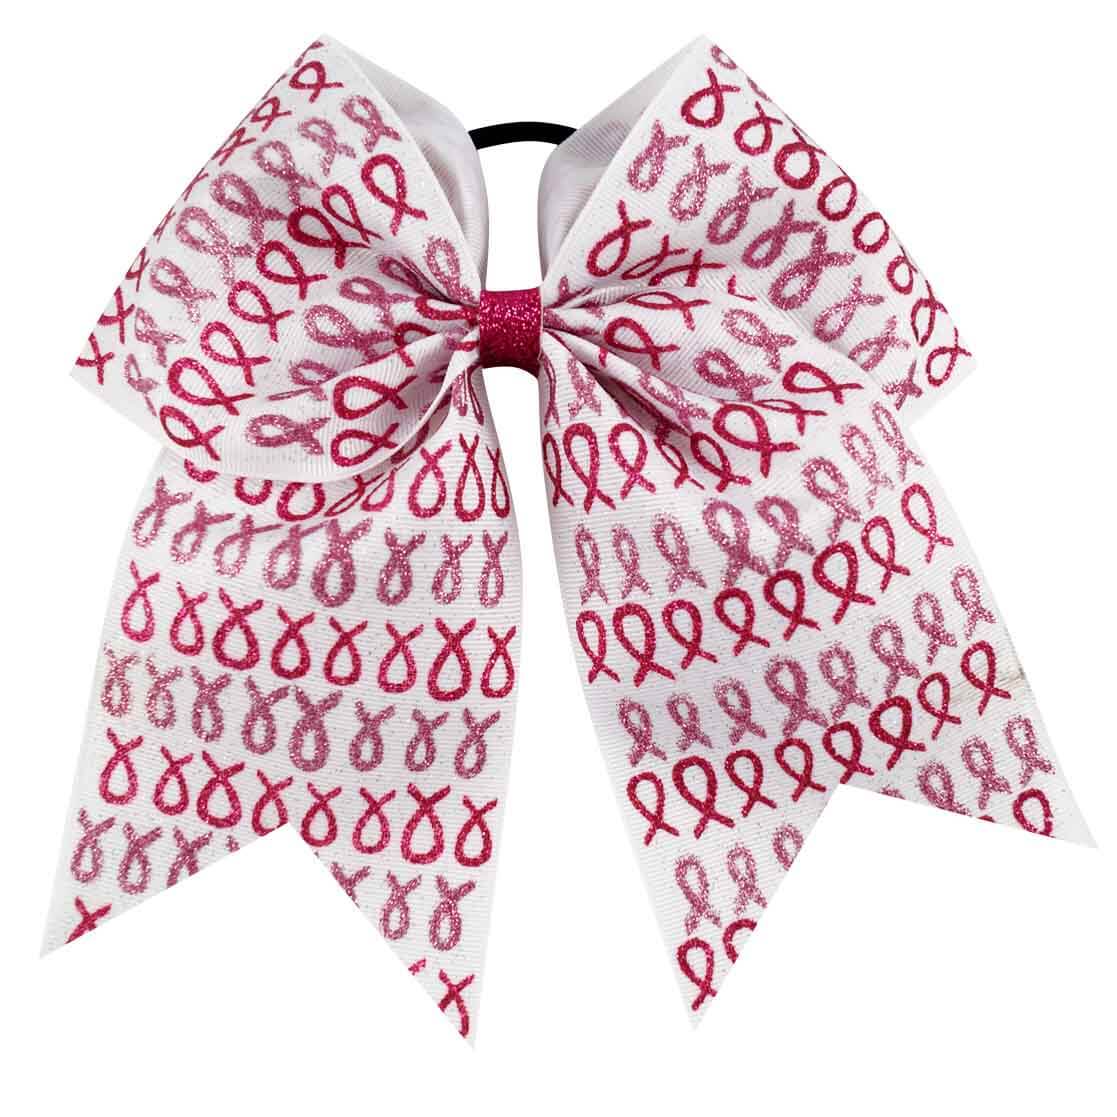 Breast Cancer Awareness Glitter Cheer Bows